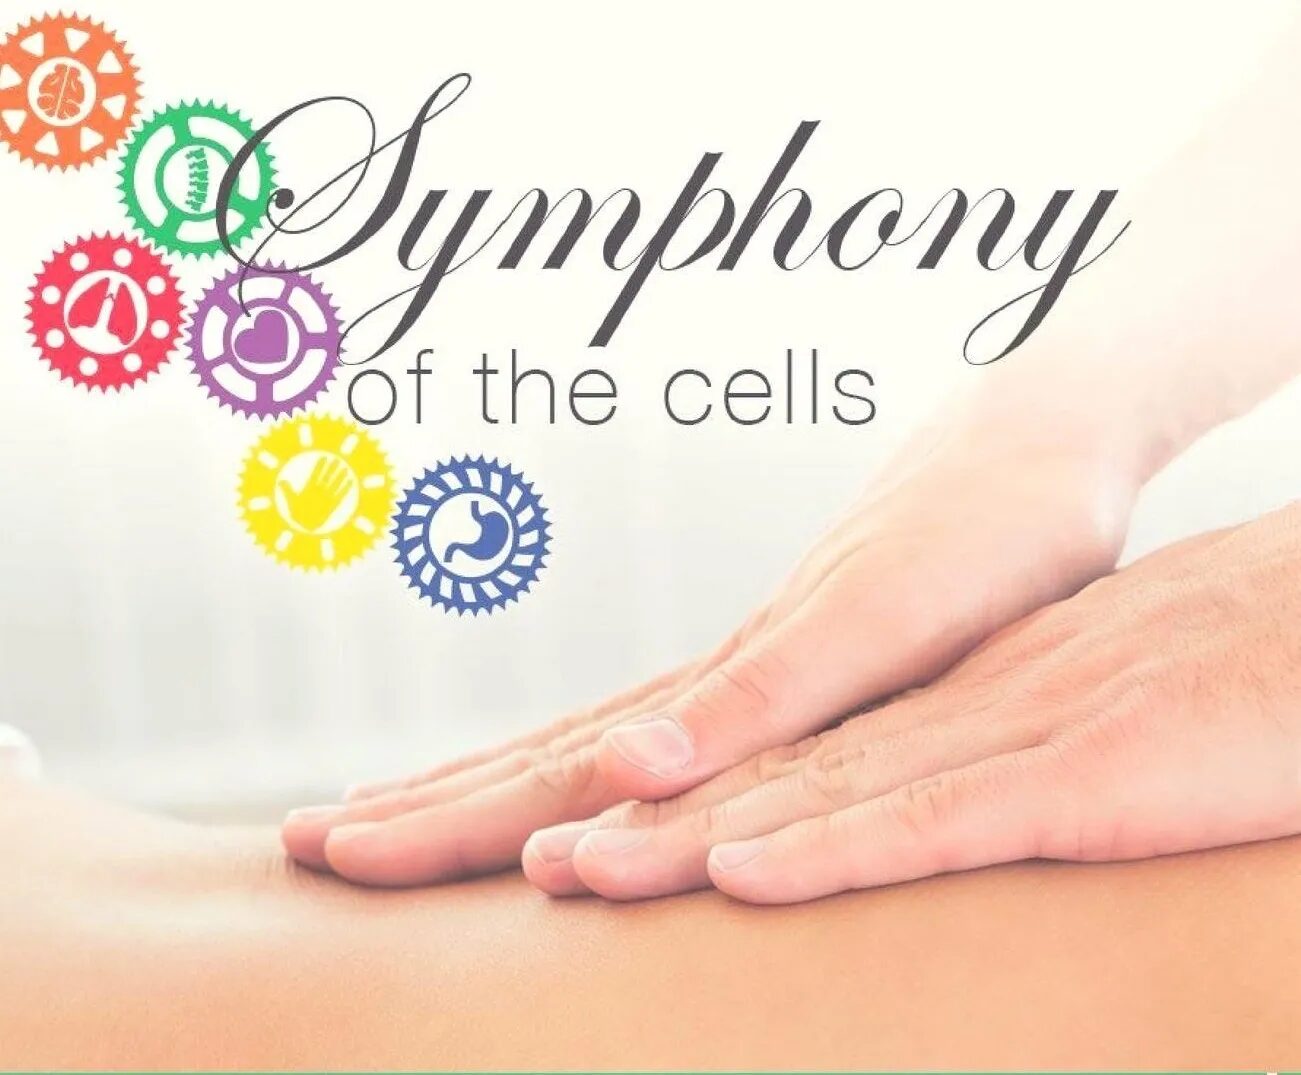 A person is touching their hand with the words symphony of the cells above them.